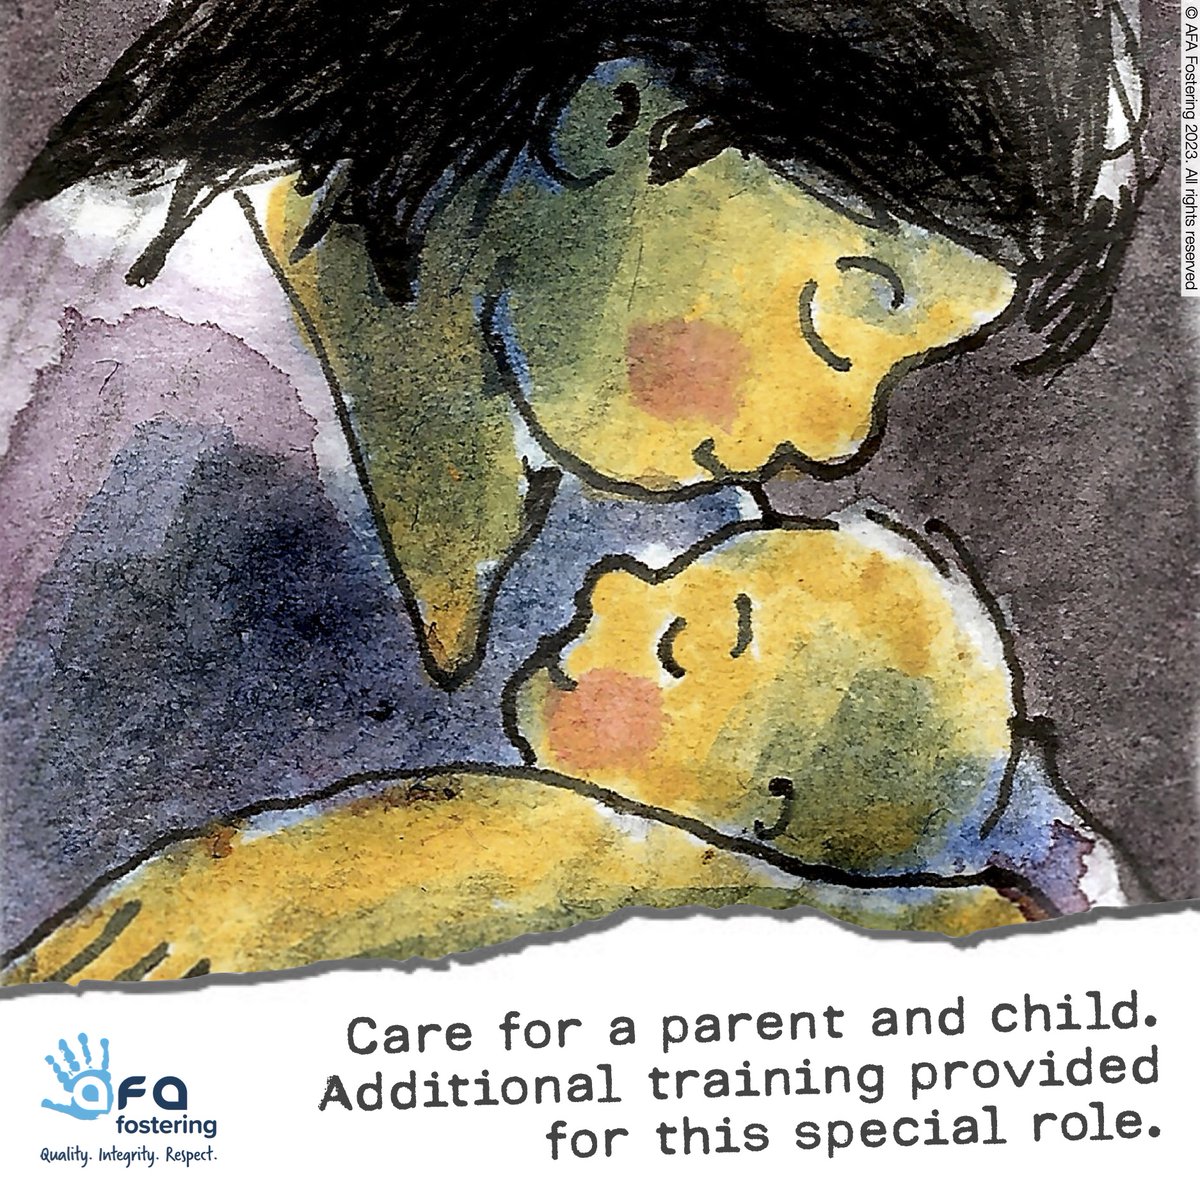 Considered fostering a parent and child? We train our foster parents in this role, focusing on observation, child development, and professional collaboration. Support parents, keep families together. Call 0333 358 3217. #AFAFostering #ParentChildFostering